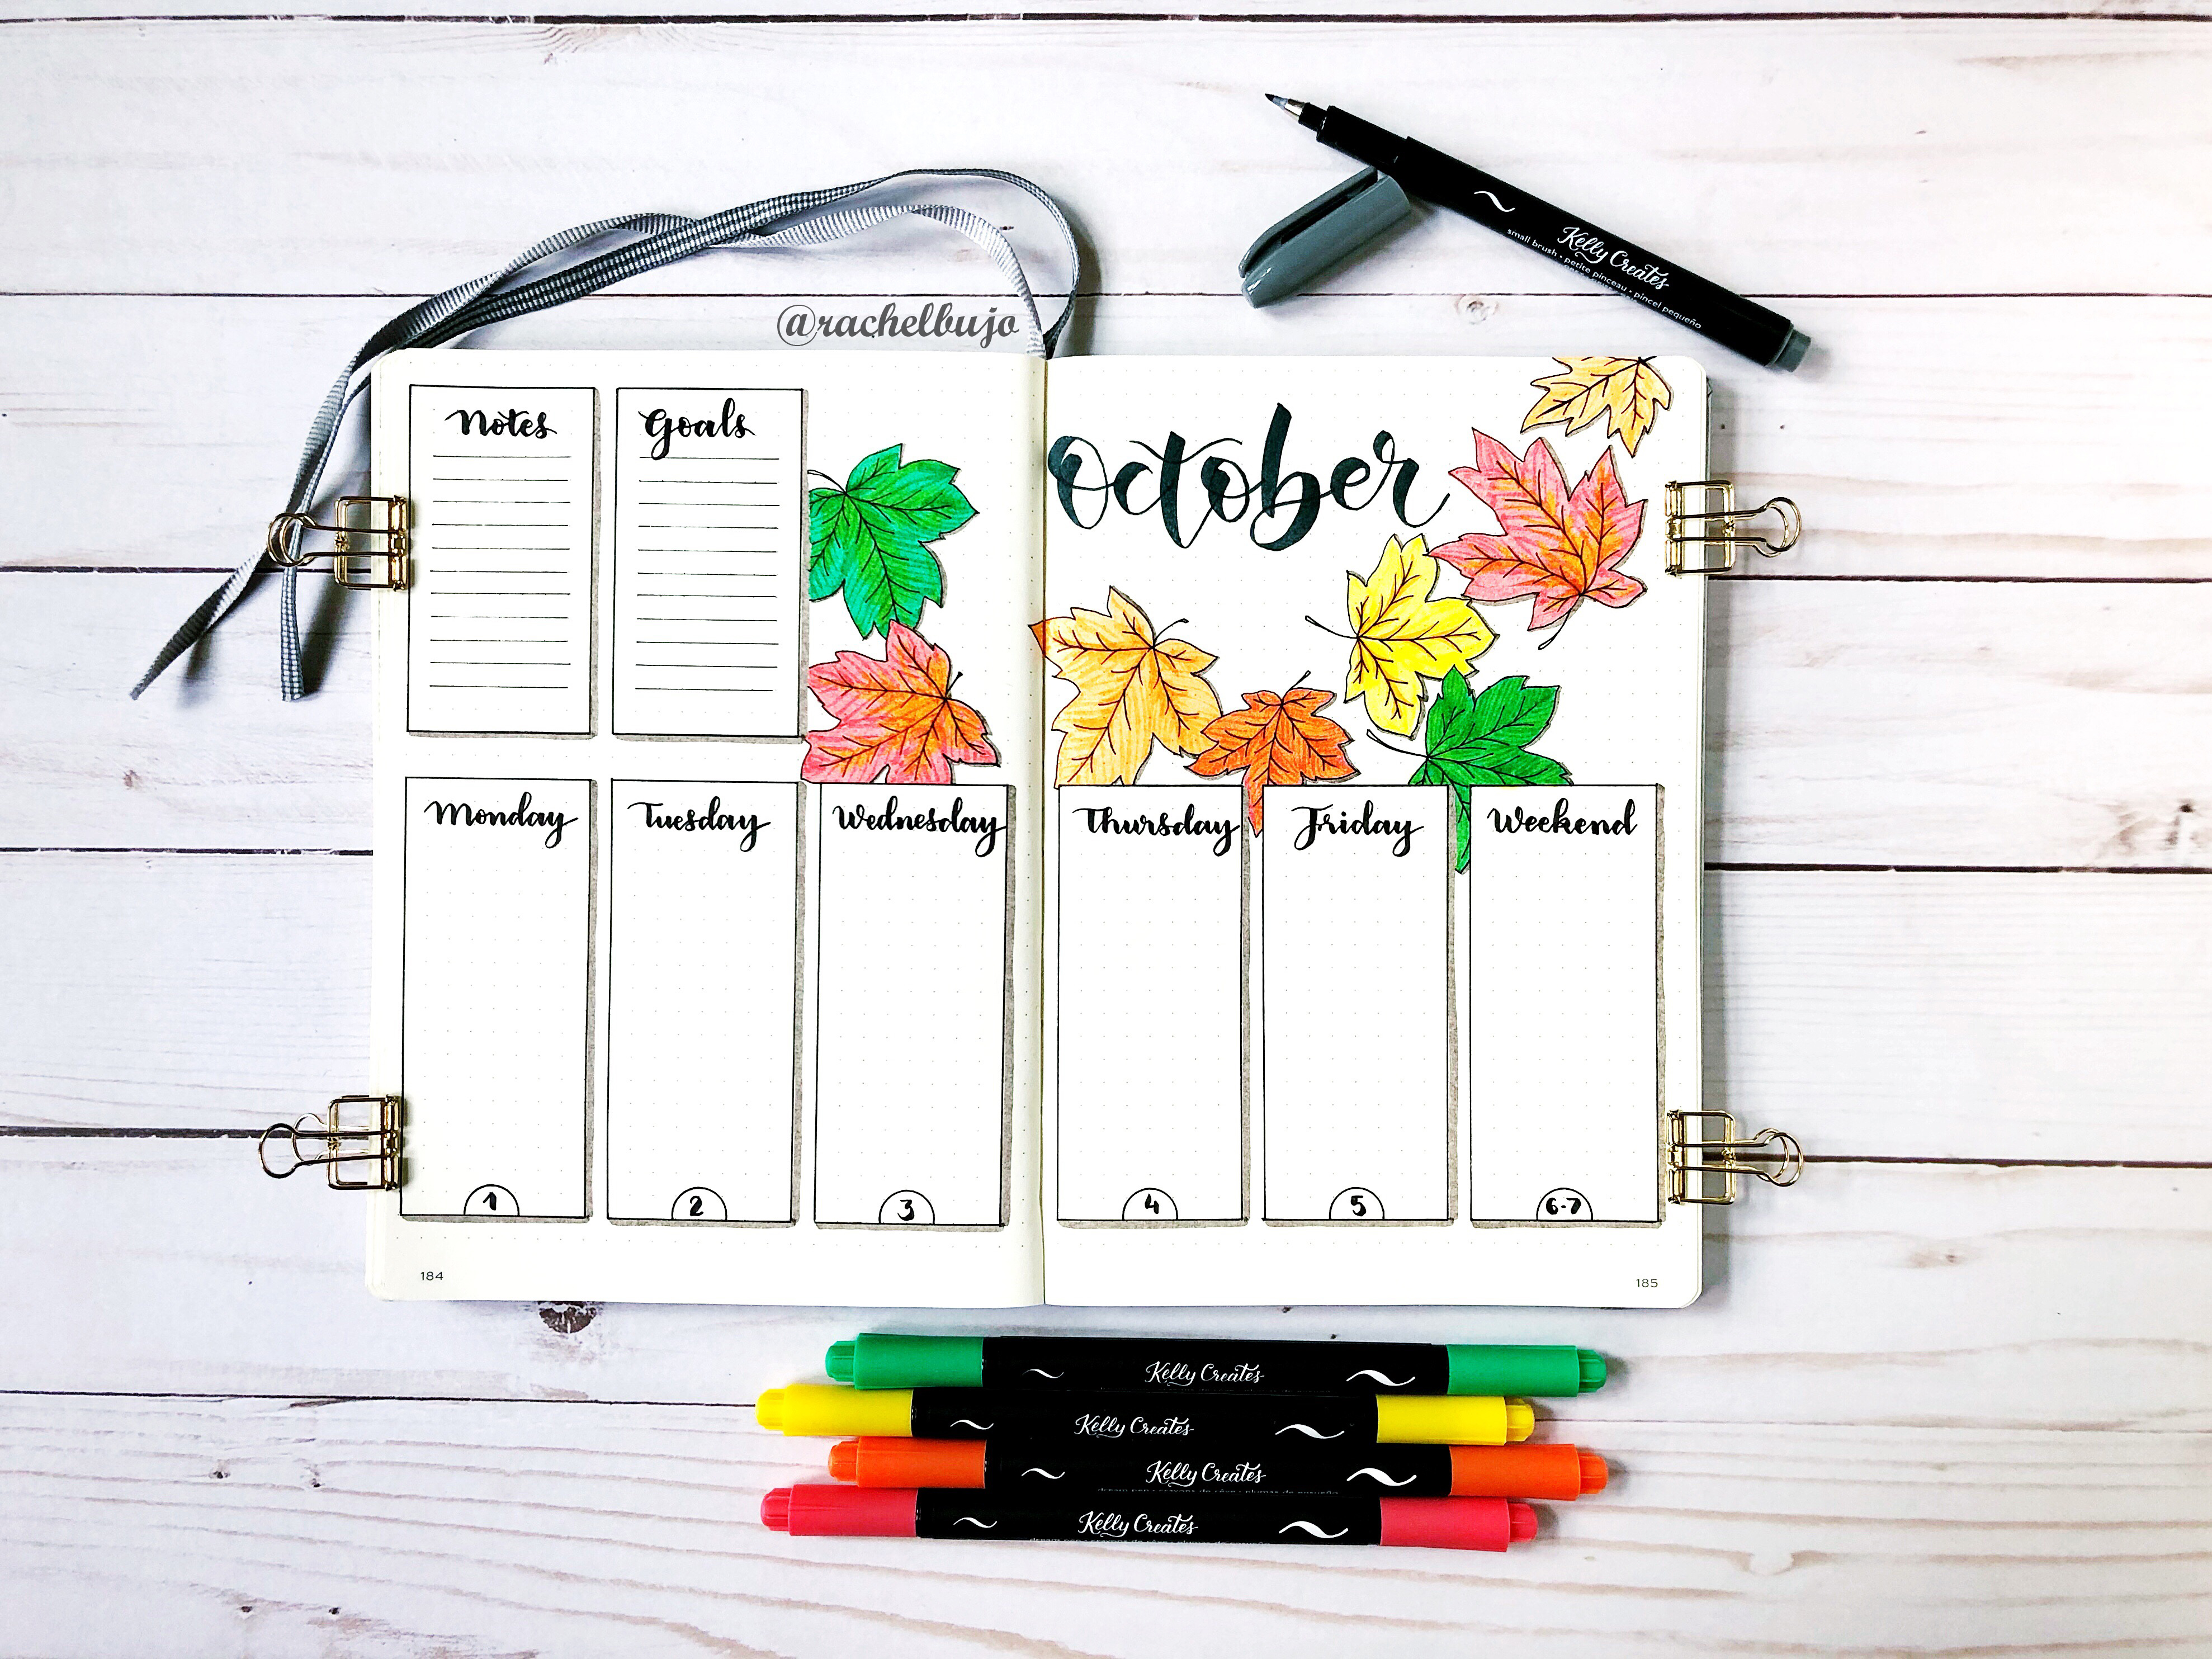 http://www.kellycreates.ca/wp-content/blogs.dir/36/files/2018/09/Weekly-spread-how-to.jpg